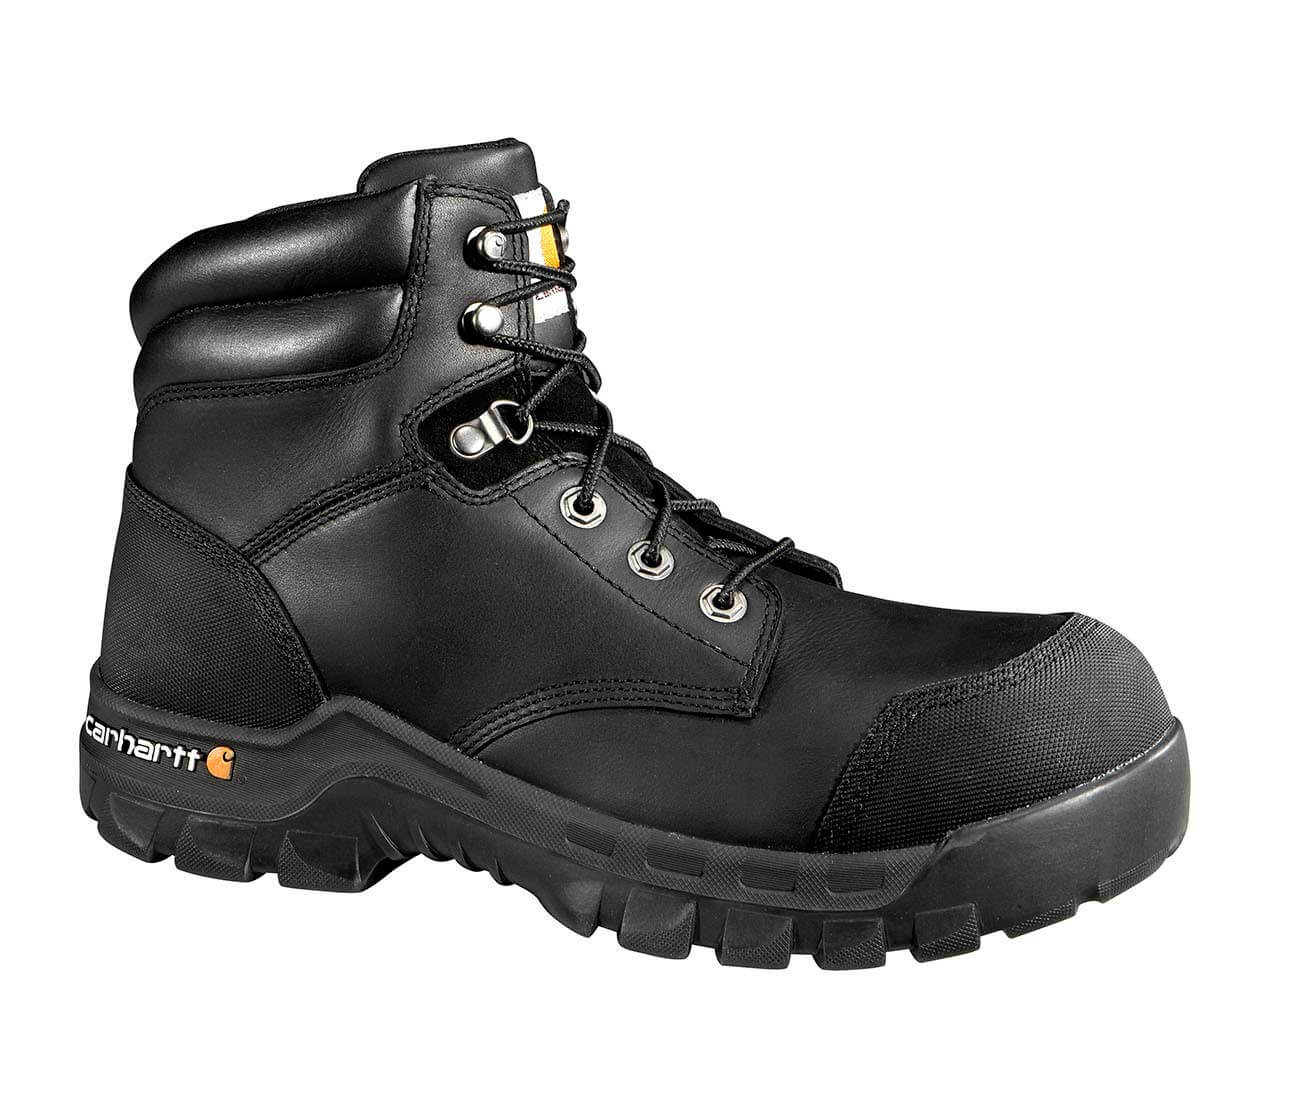 Carhartt - CMF6371 - Rugged Flex Black Leather Waterproof Composite Safety Toe 6 Lace-up Work Boot